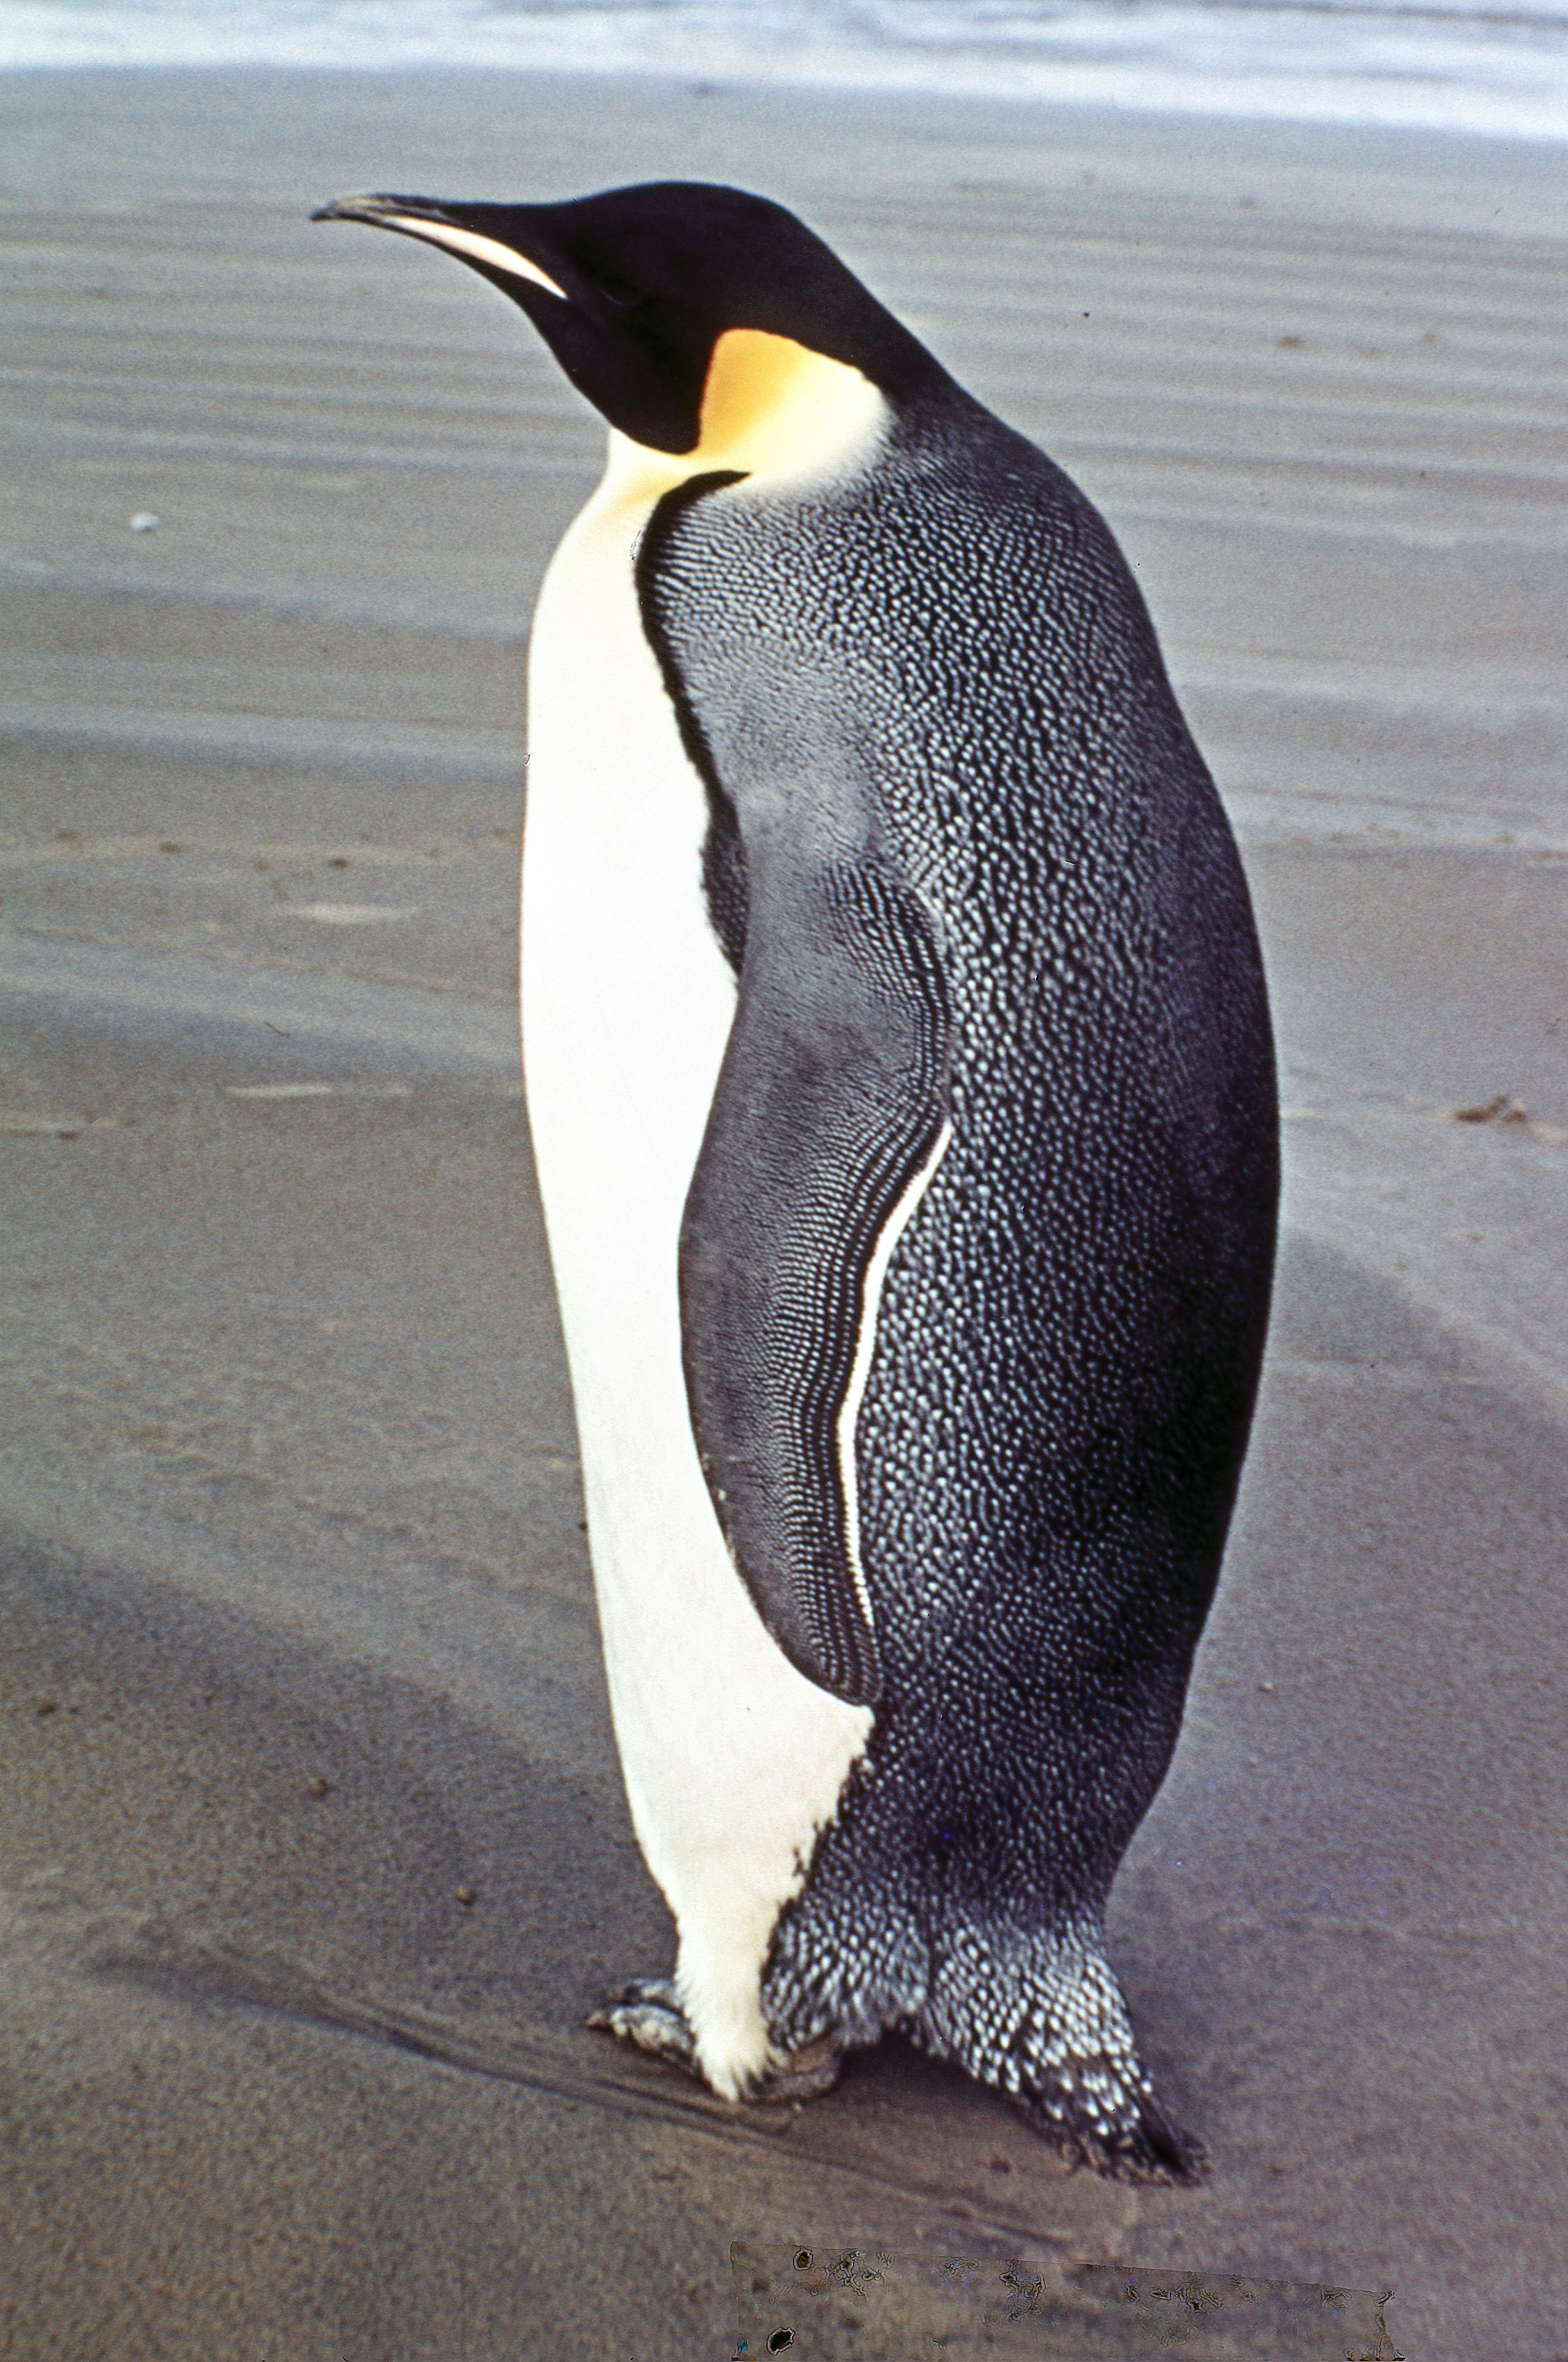 A Research on Emperor Penguins